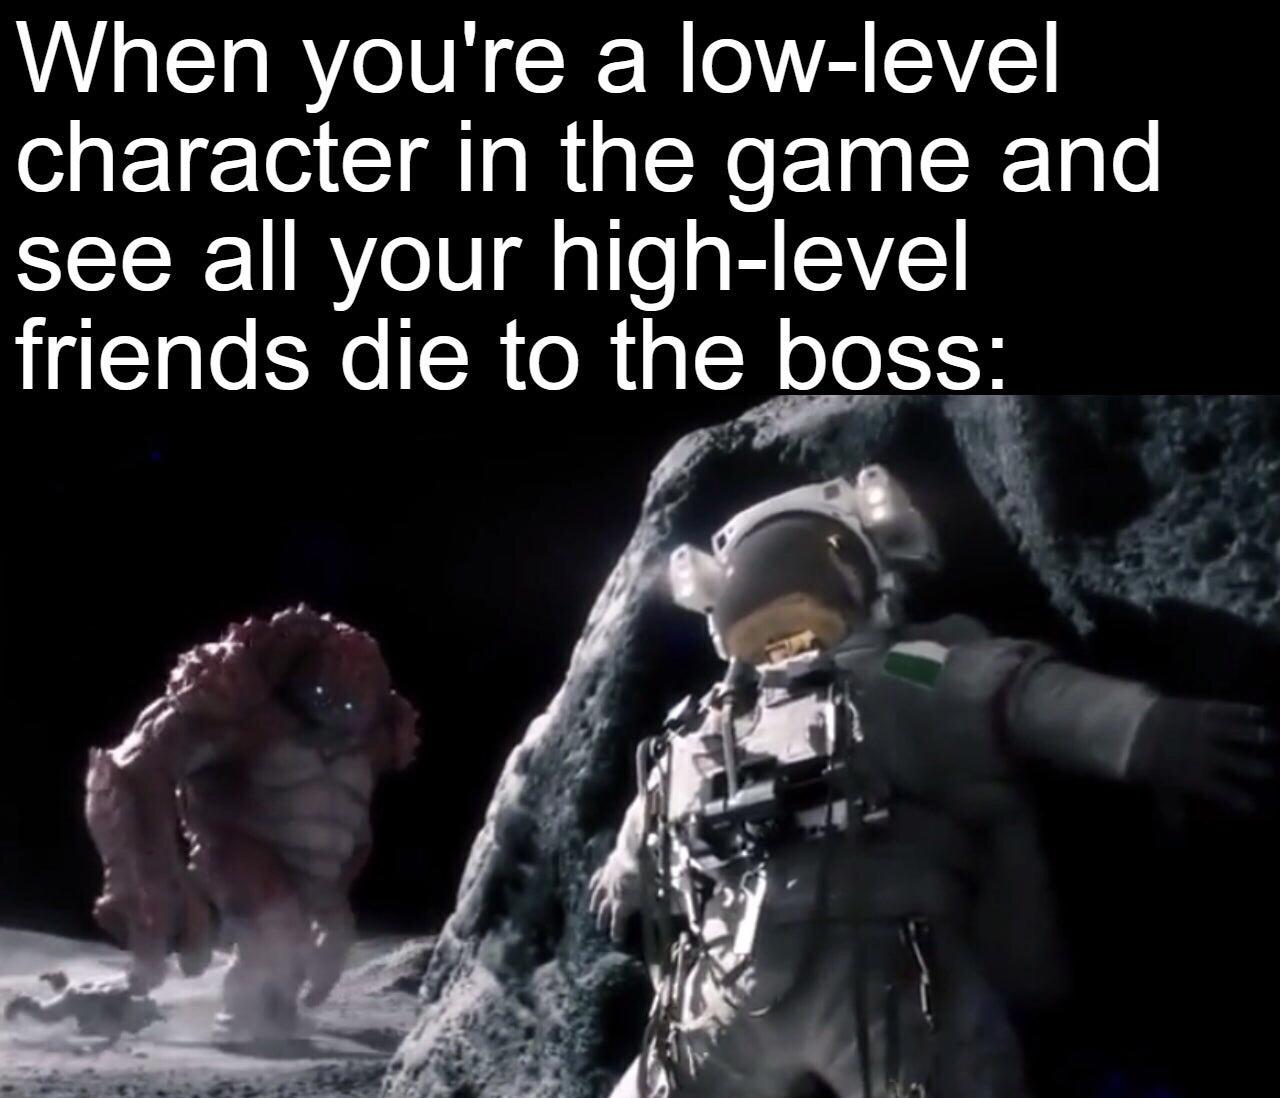 funny gaming memes - When you're a lowlevel character in the game and see all your highlevel friends die to the boss